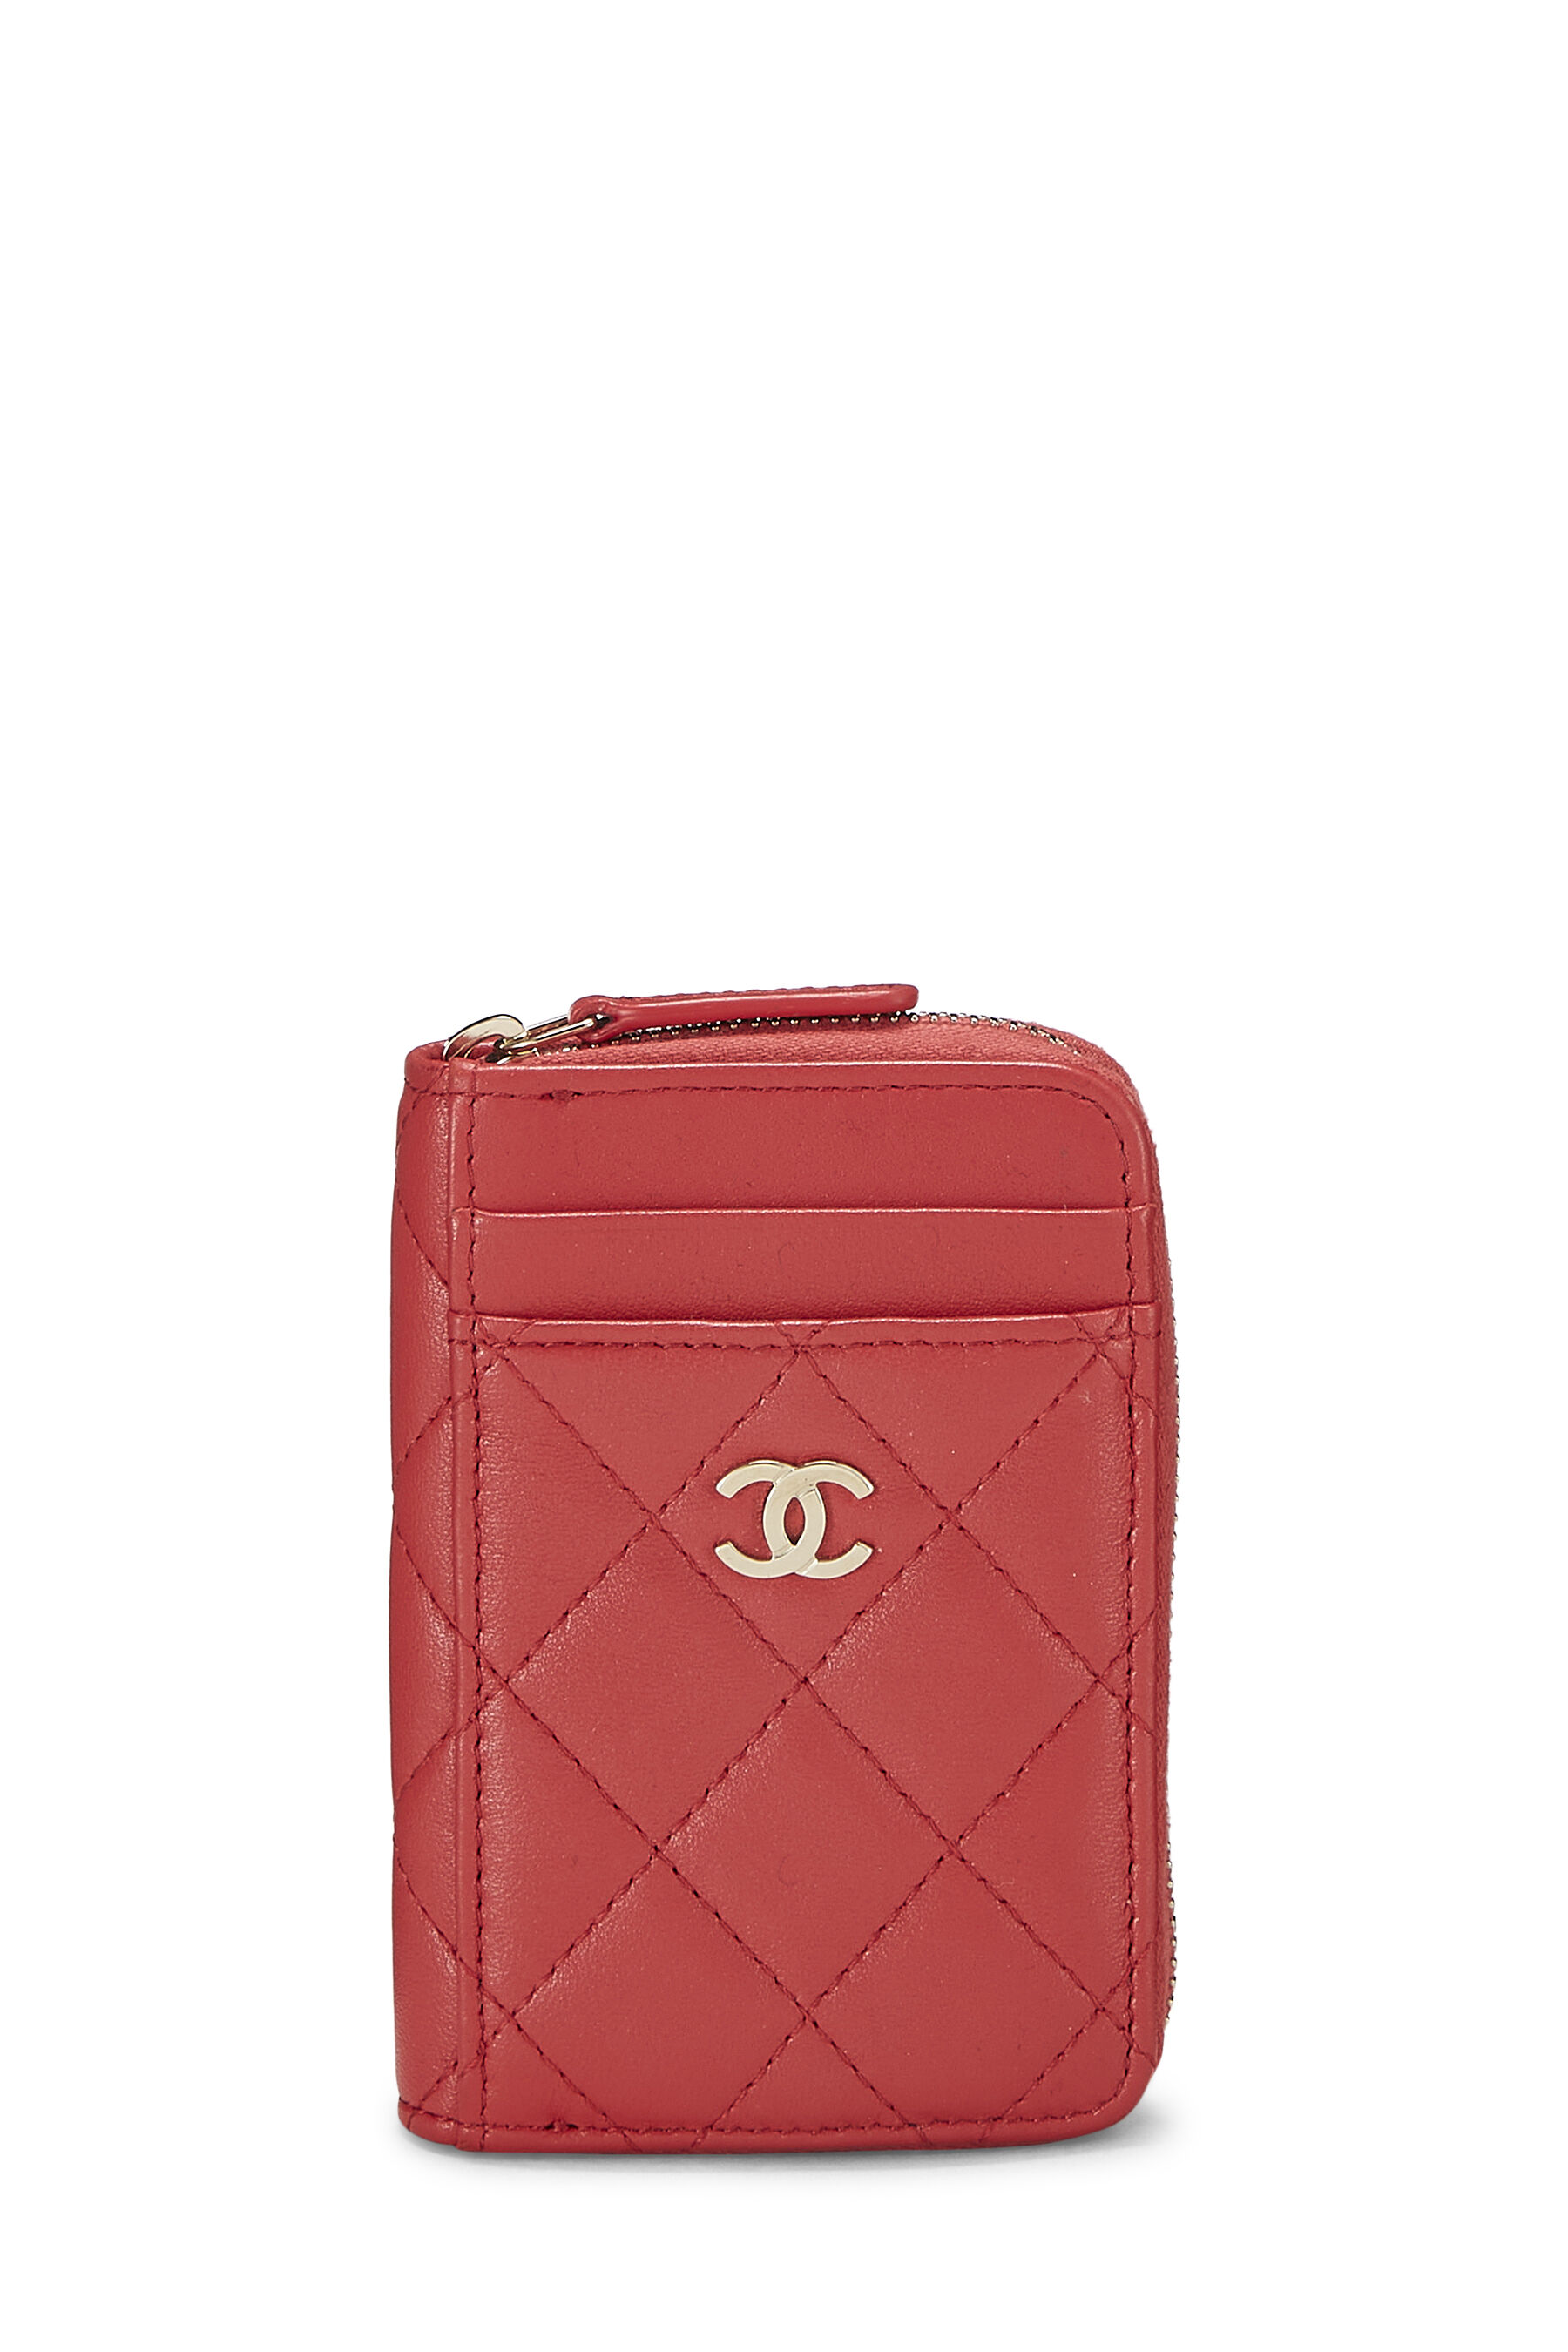 Chanel - Red Quilted Lambskin Coin Purse